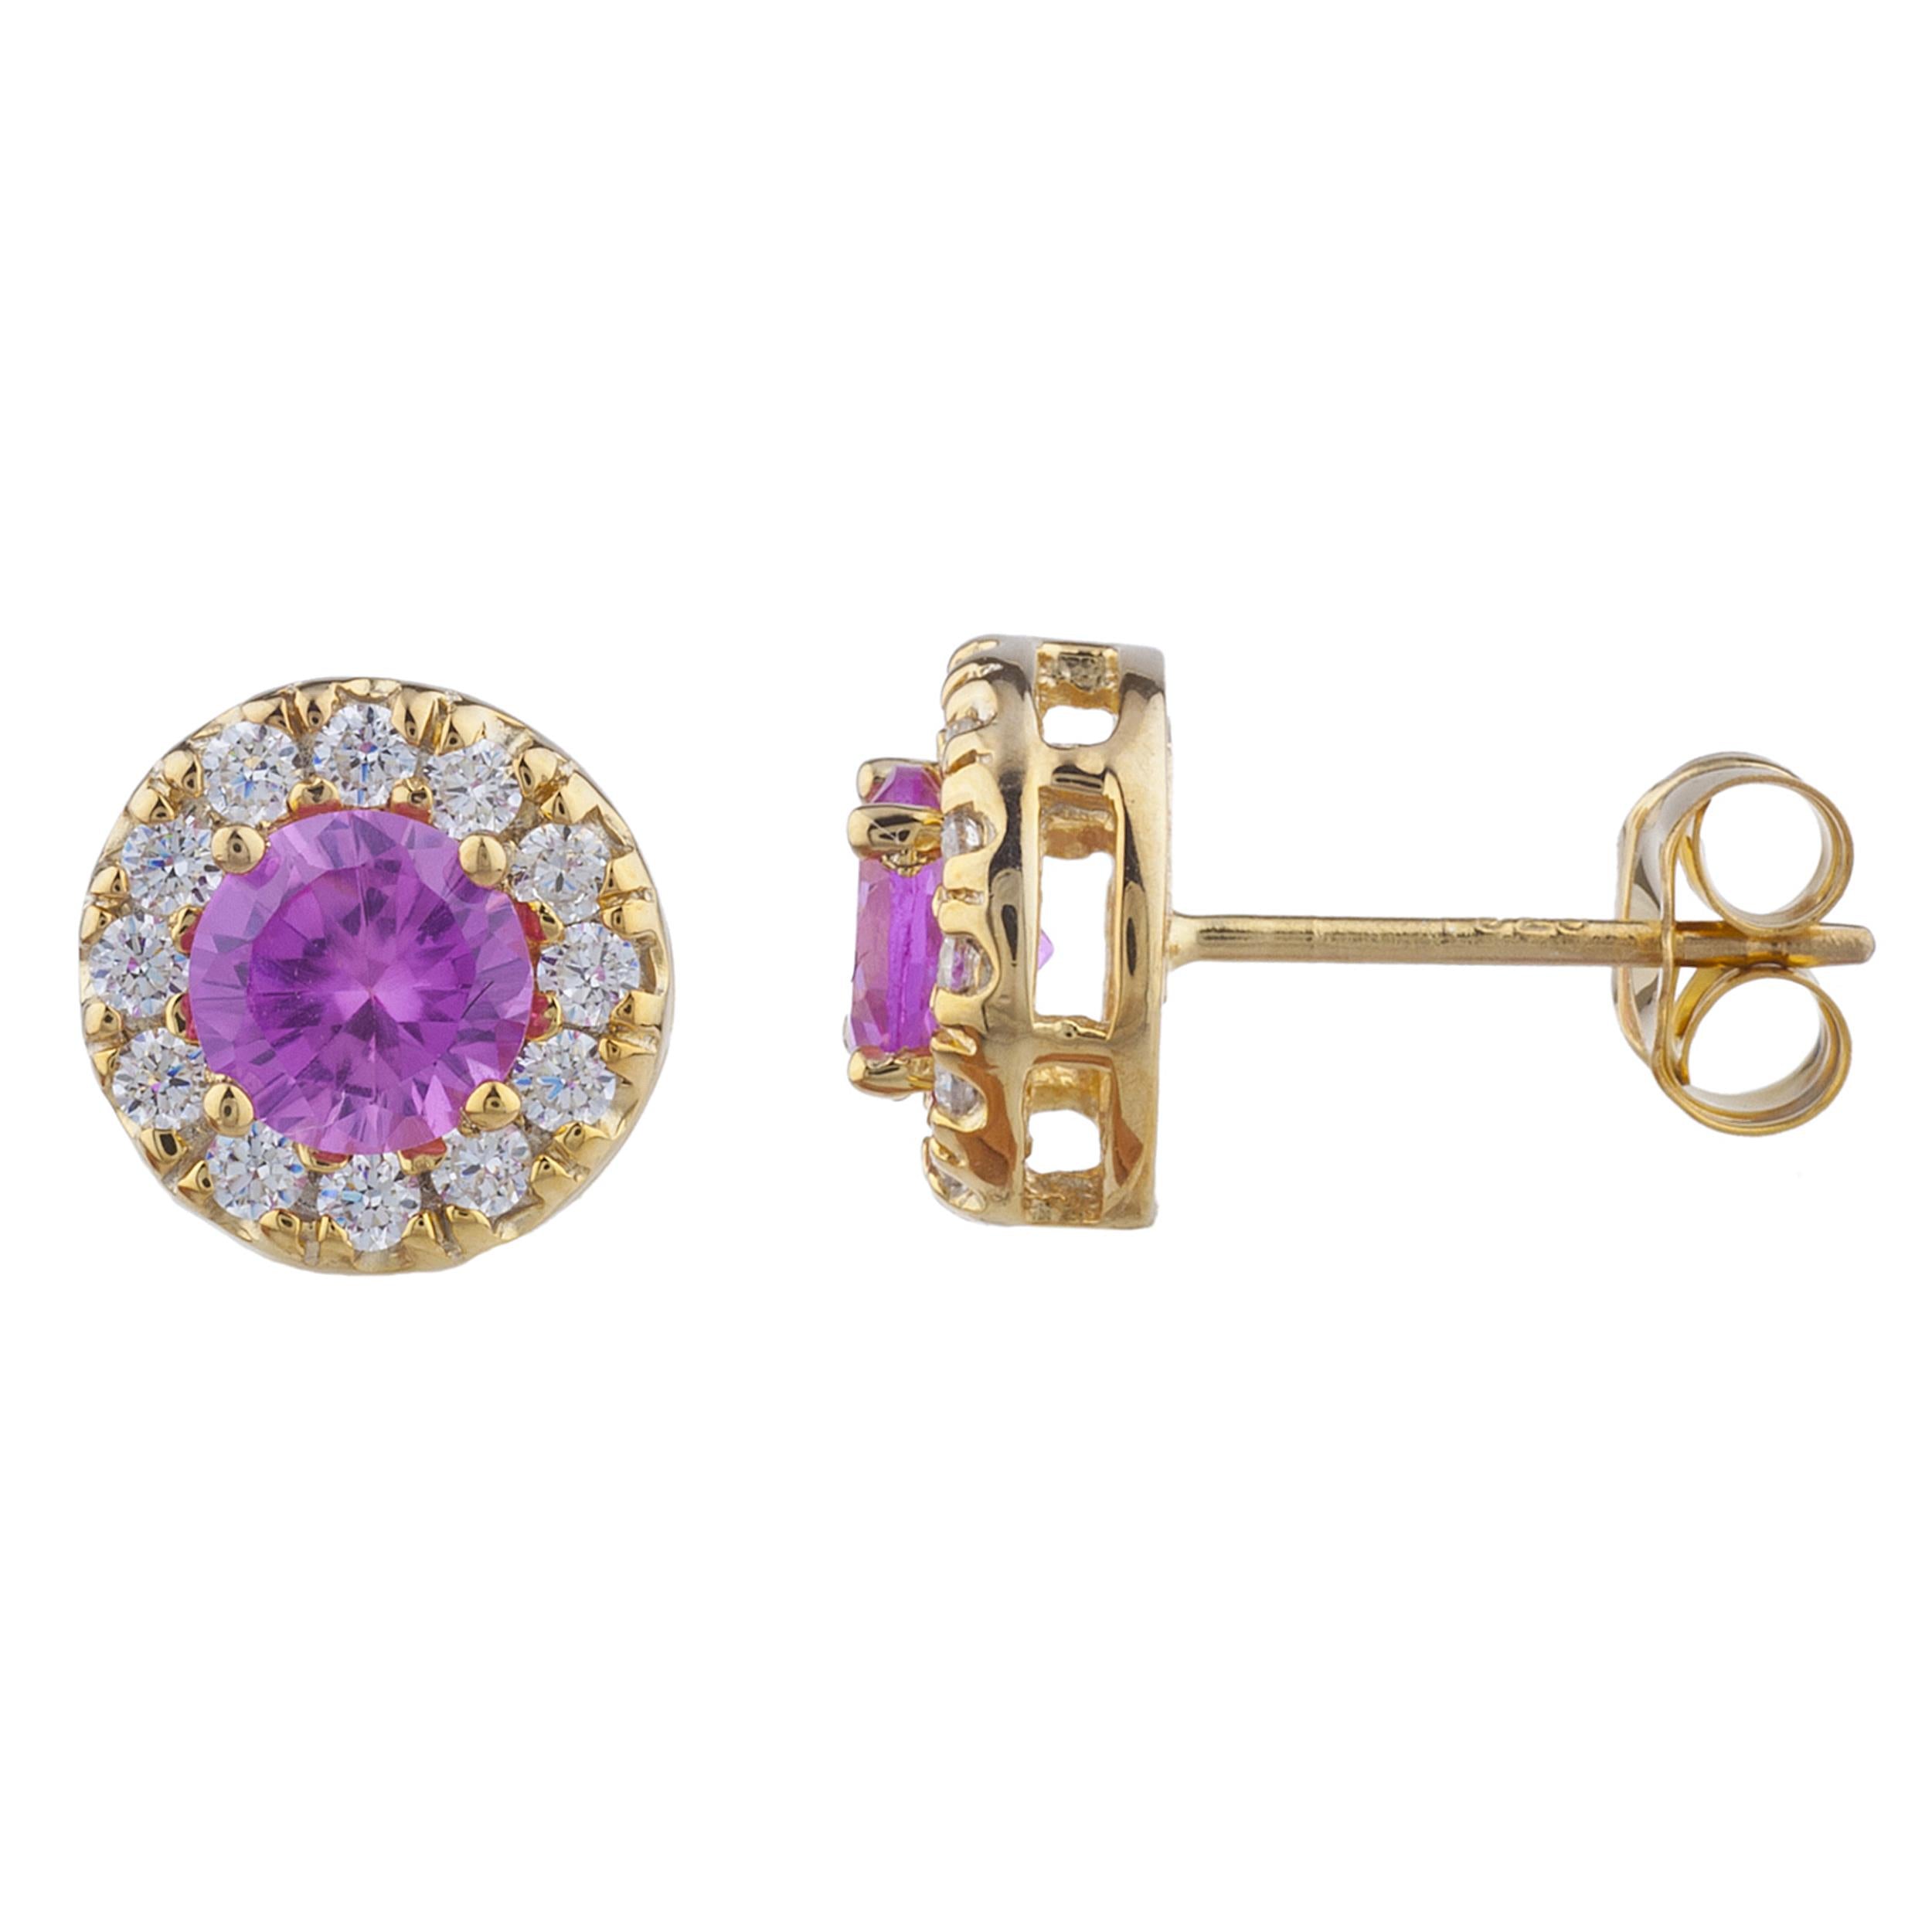 14Kt Gold 1 Ct Pink Sapphire Halo Design Stud Earrings